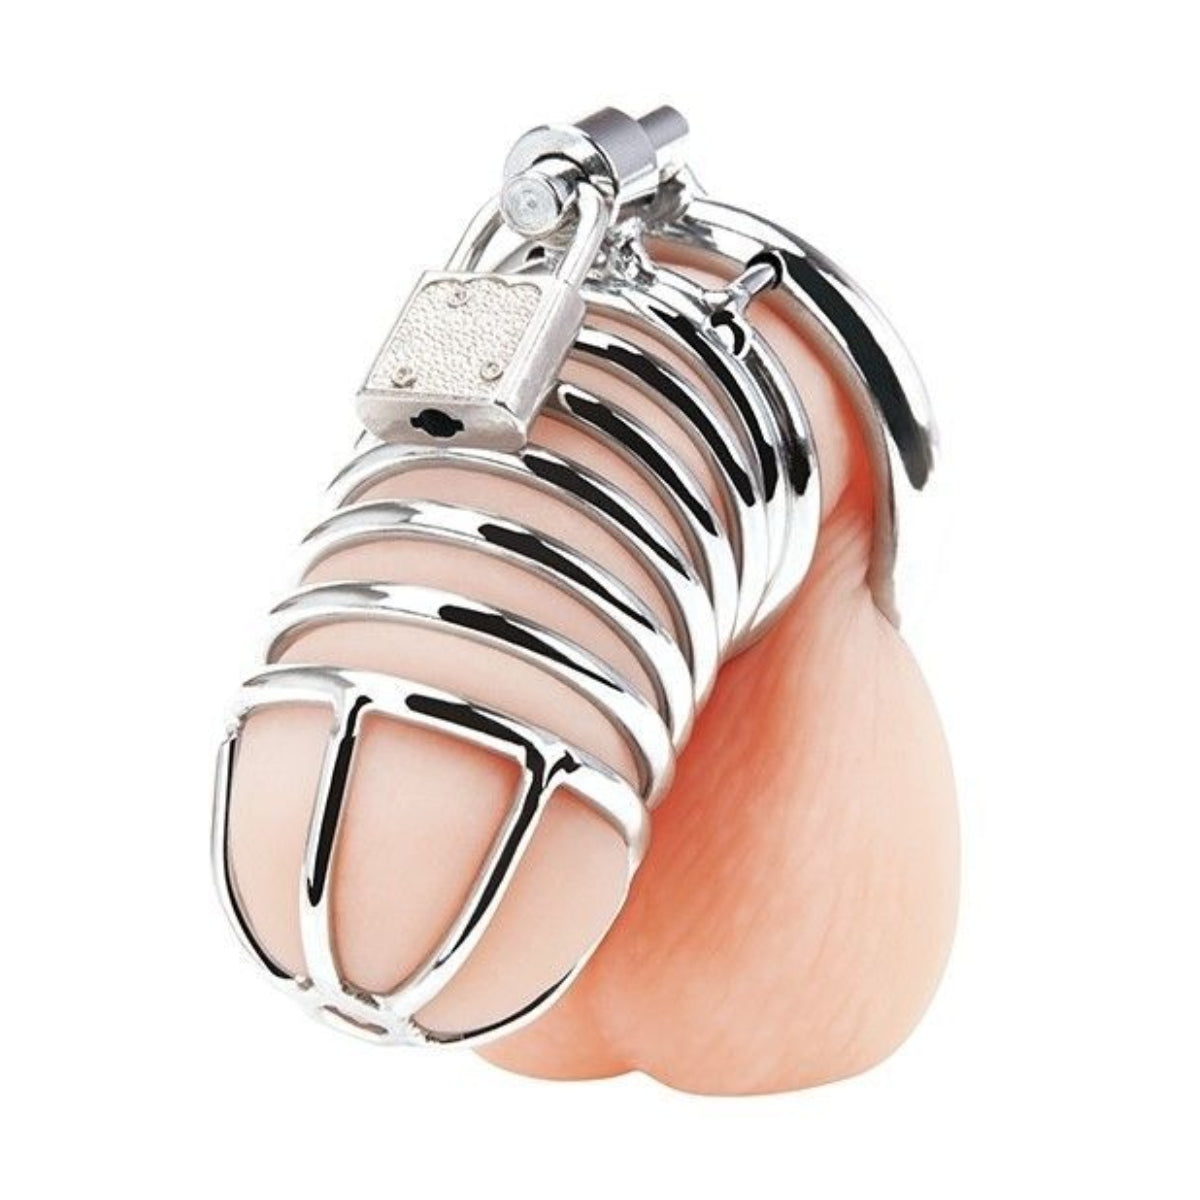 Blue Line Deluxe Chastity Cage Silver - Simply Pleasure